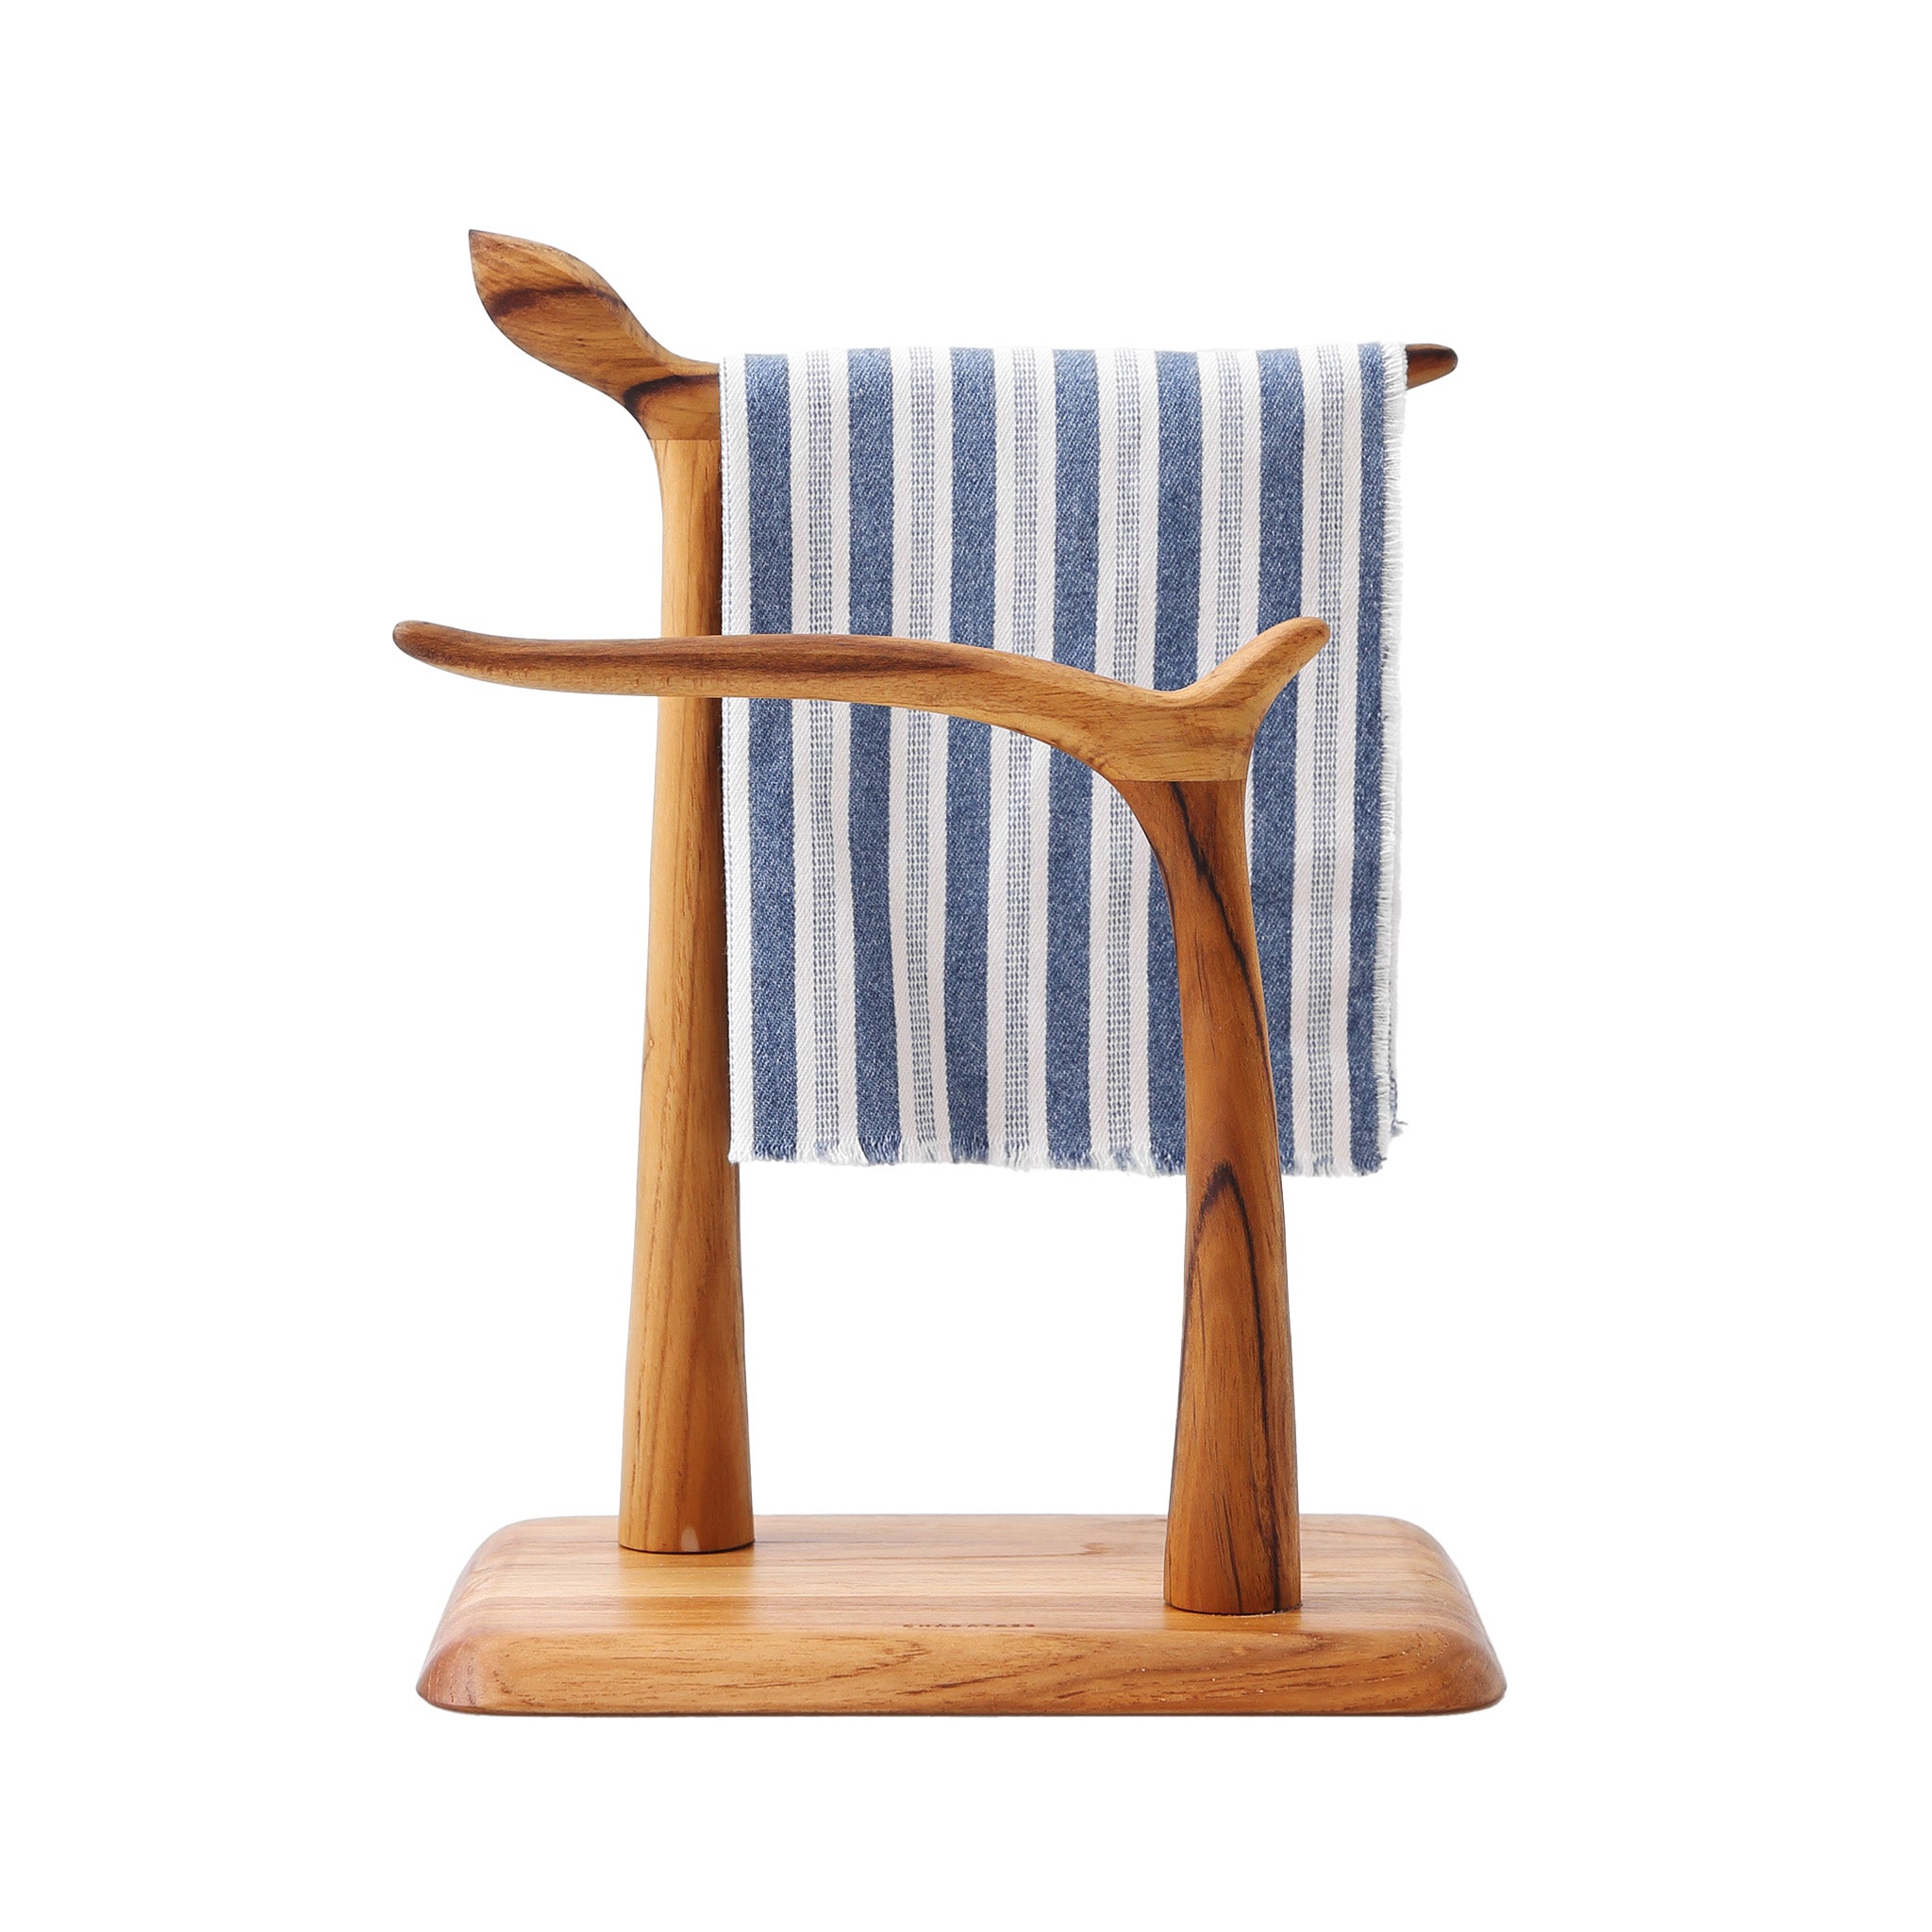 LIFE TOWEL COUNTER STAND